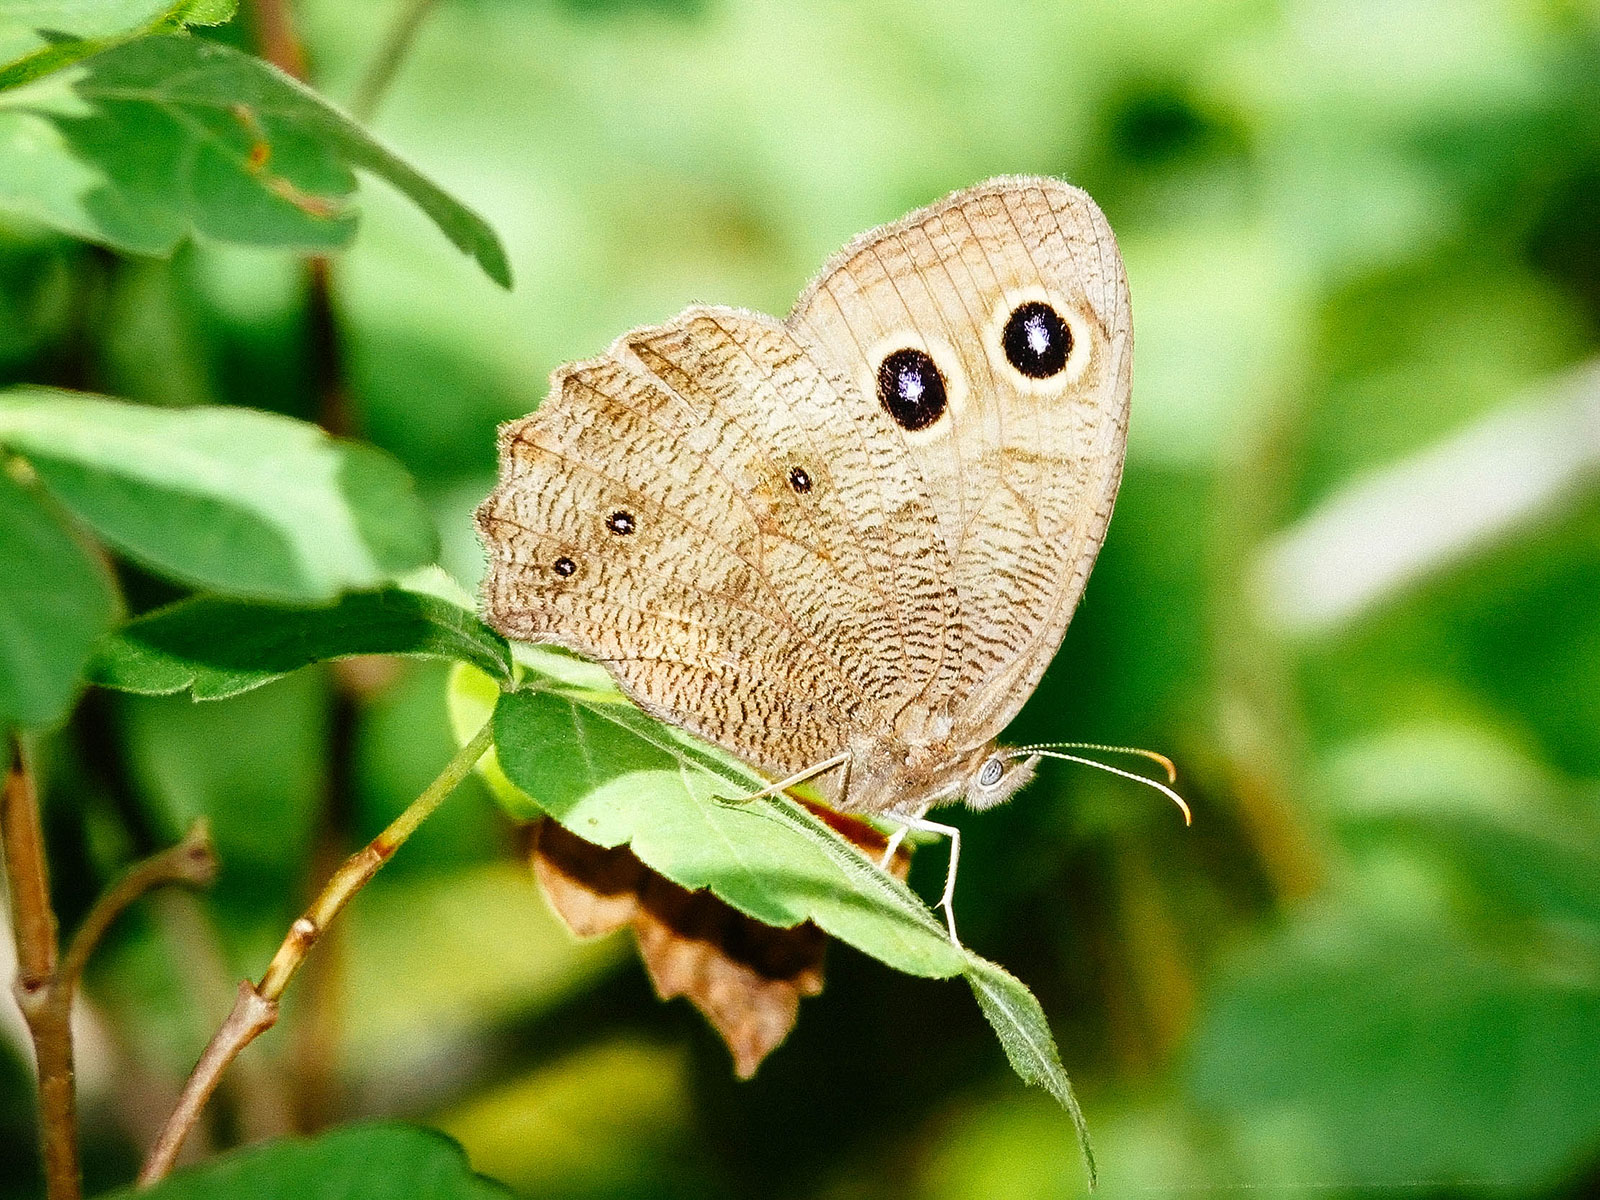 Common wood nymph butterfly resting on a leaf